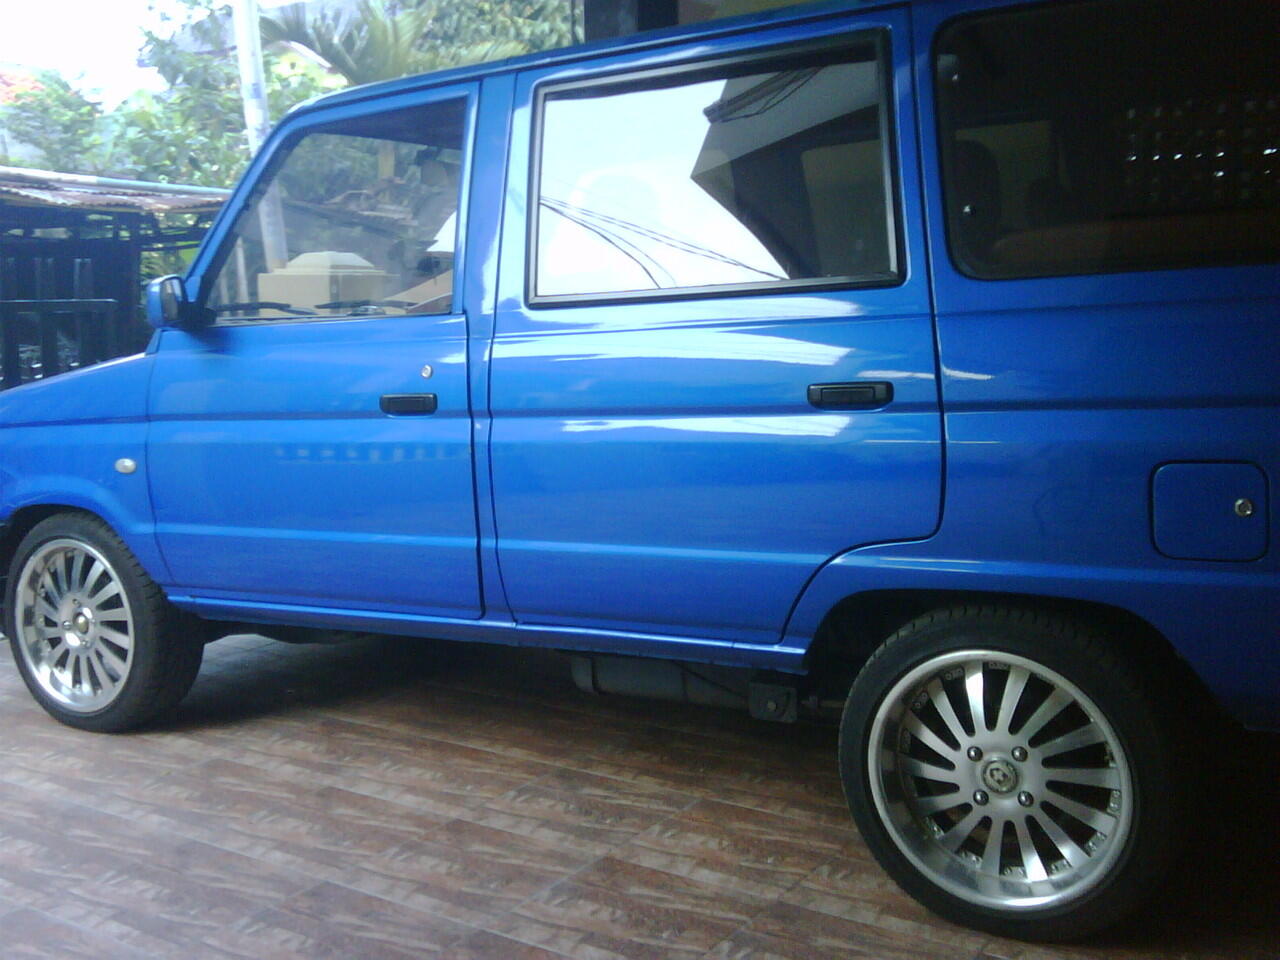 Toyota Kijang Club Indonesia Holic Come In Page 71 KASKUS